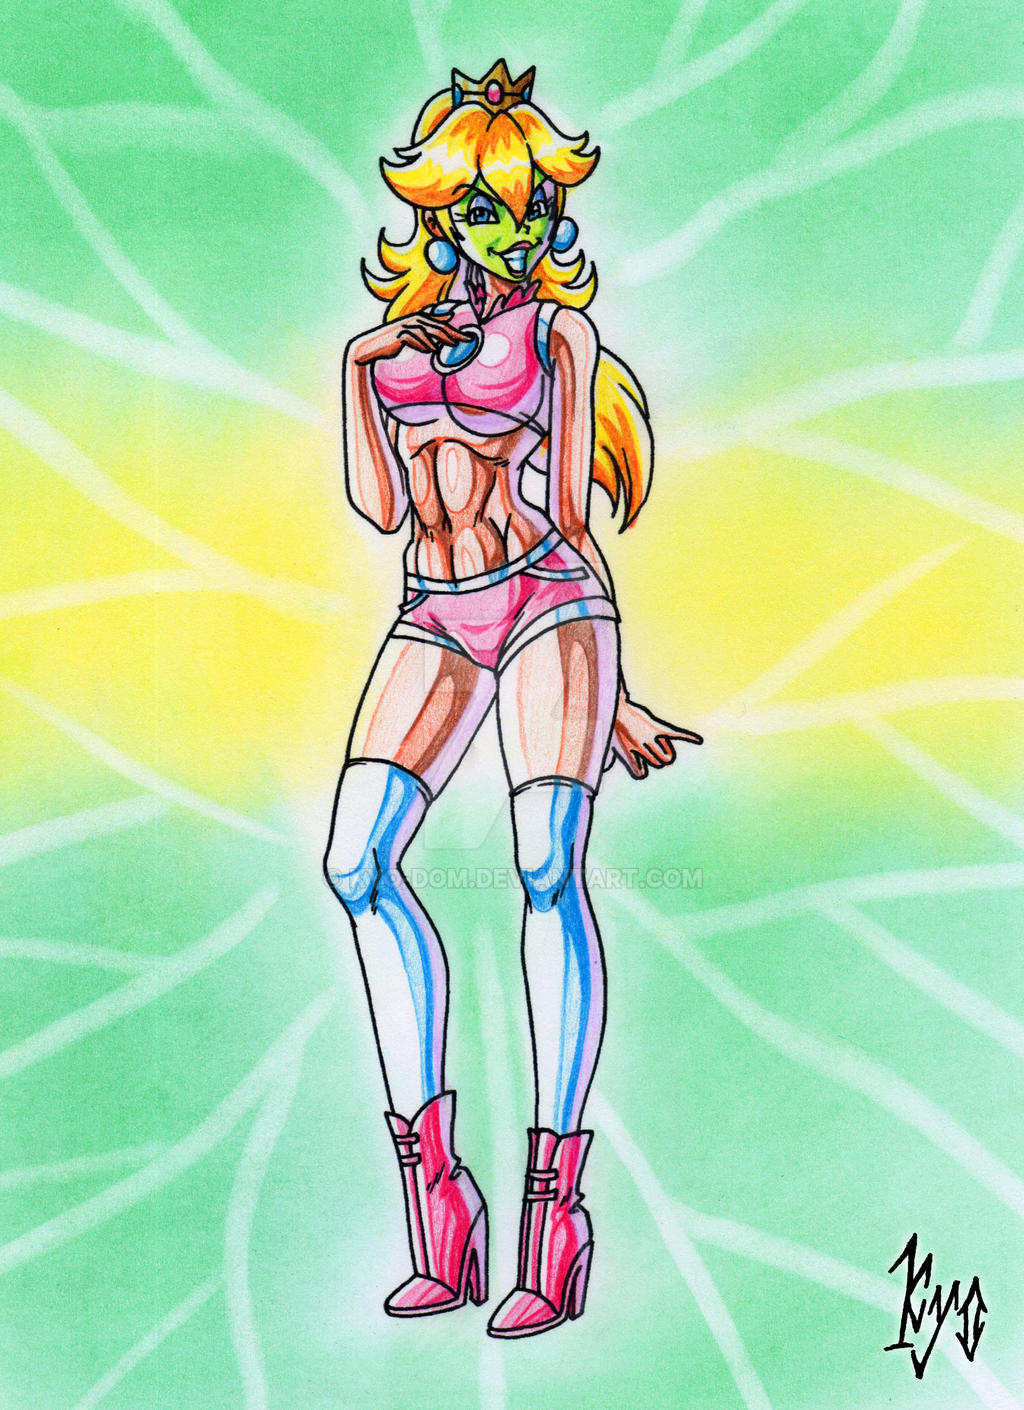 Princess Peach in Sport outfit masked